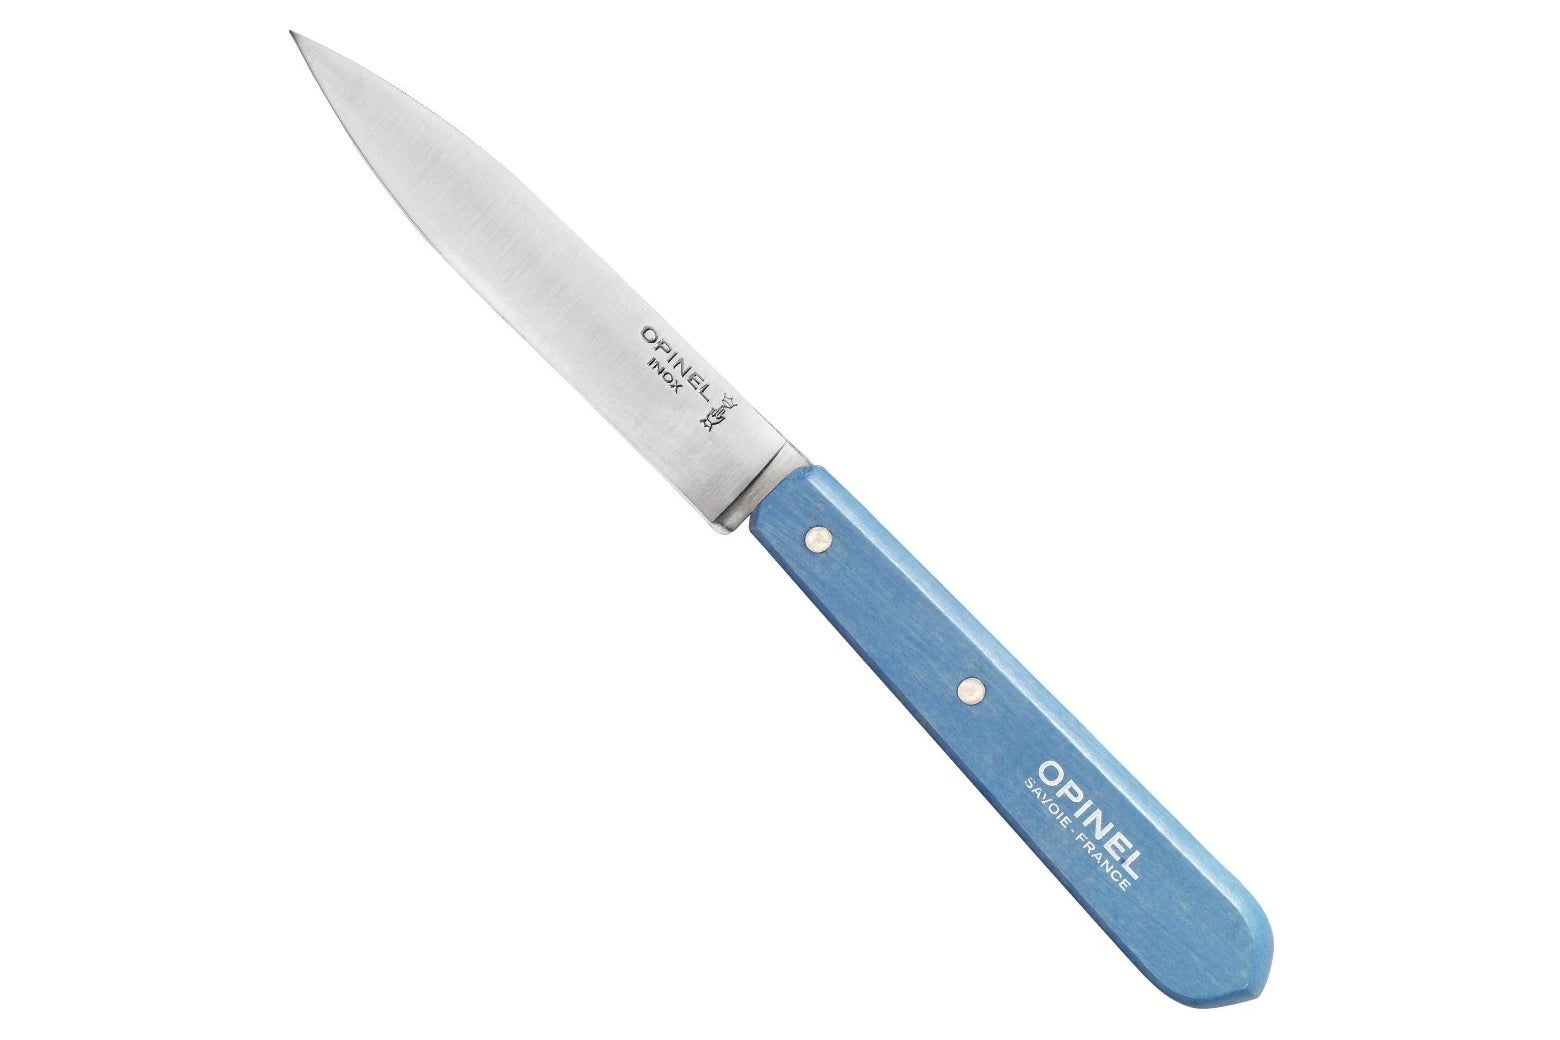 Opinel paring knife